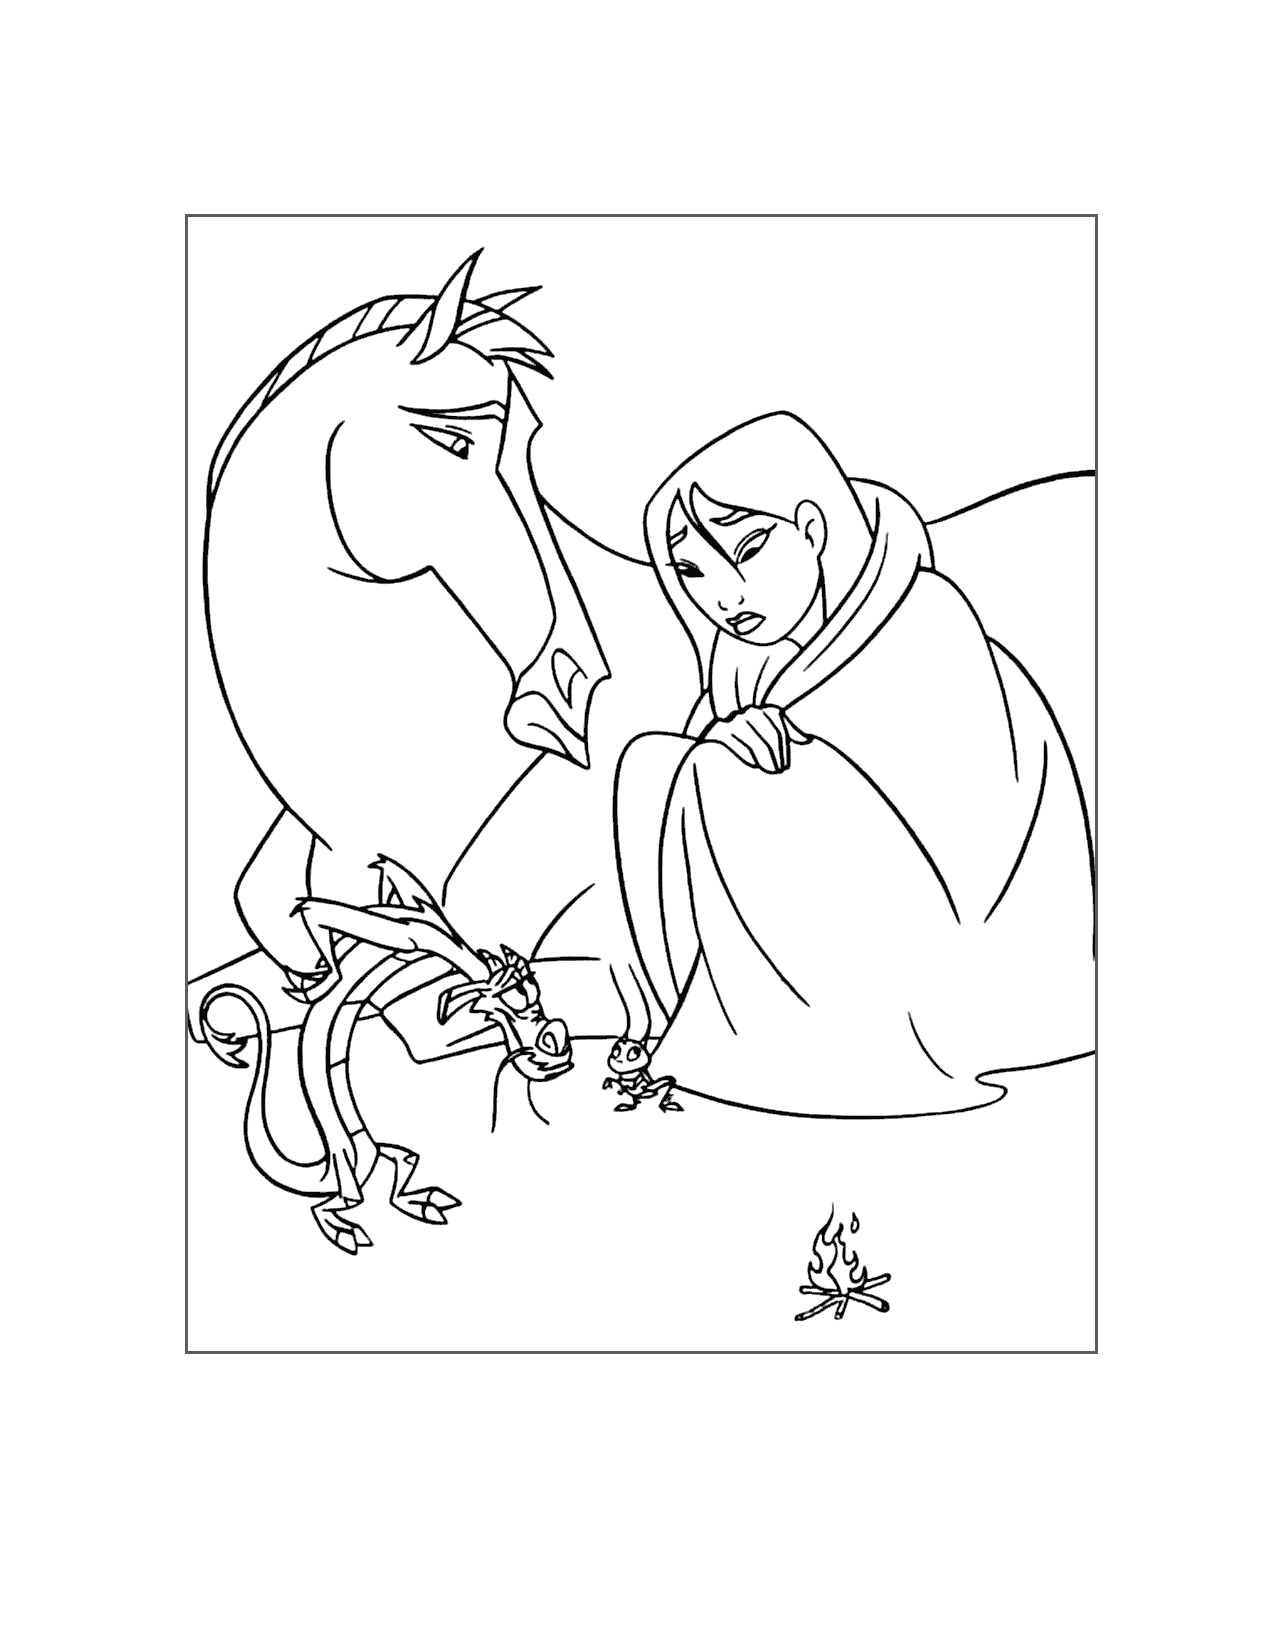 The Animals Help Mulan Coloring Page